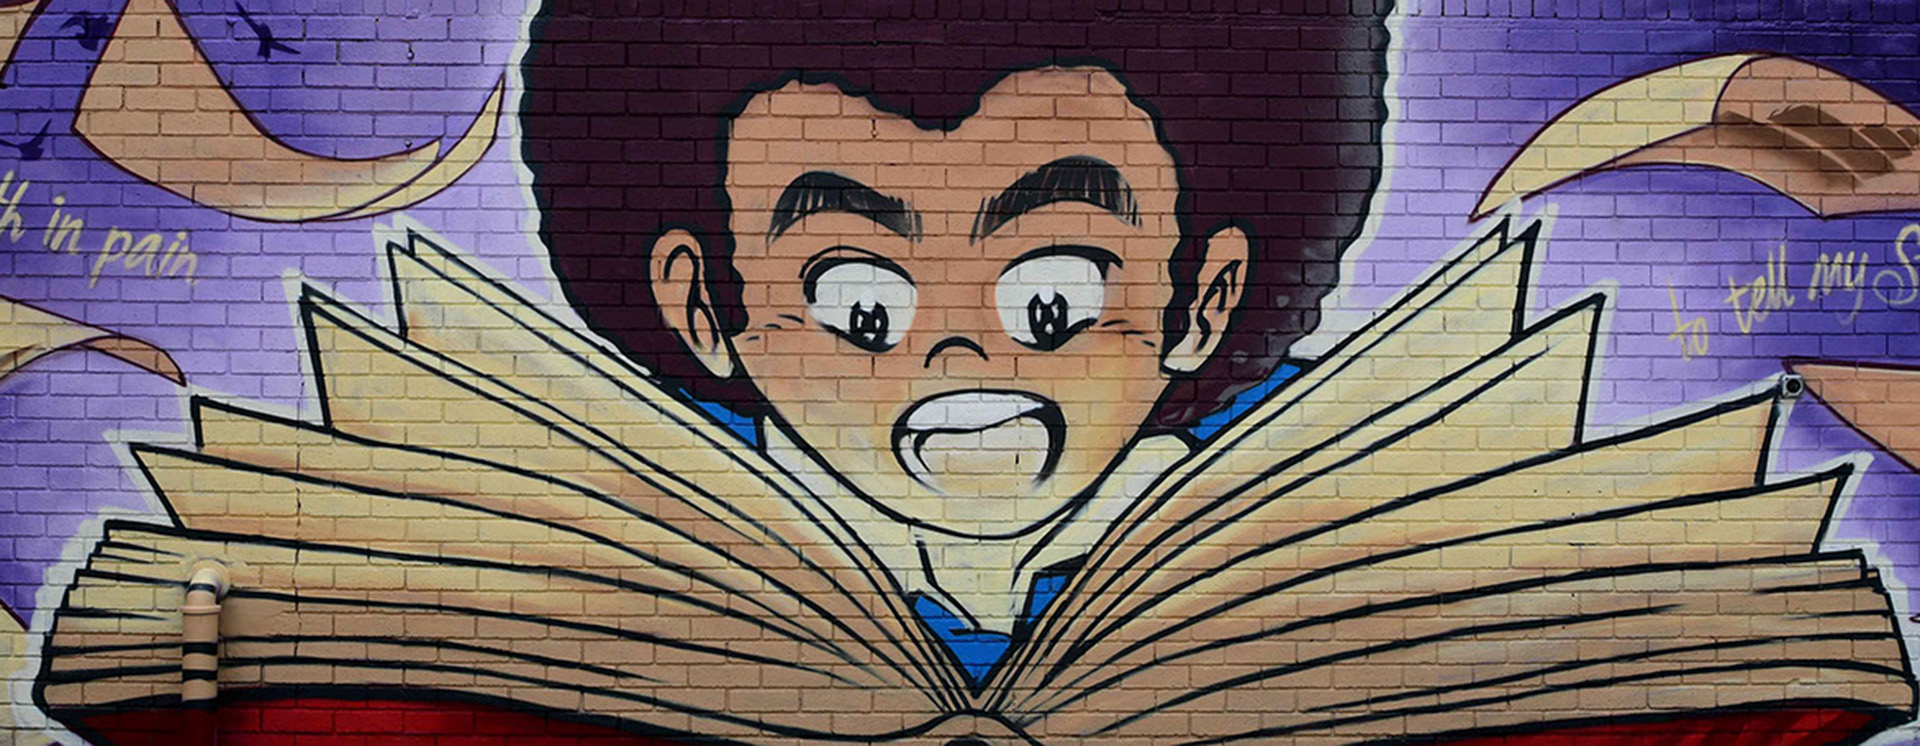 Mural painted on a wall showing a person reading a book